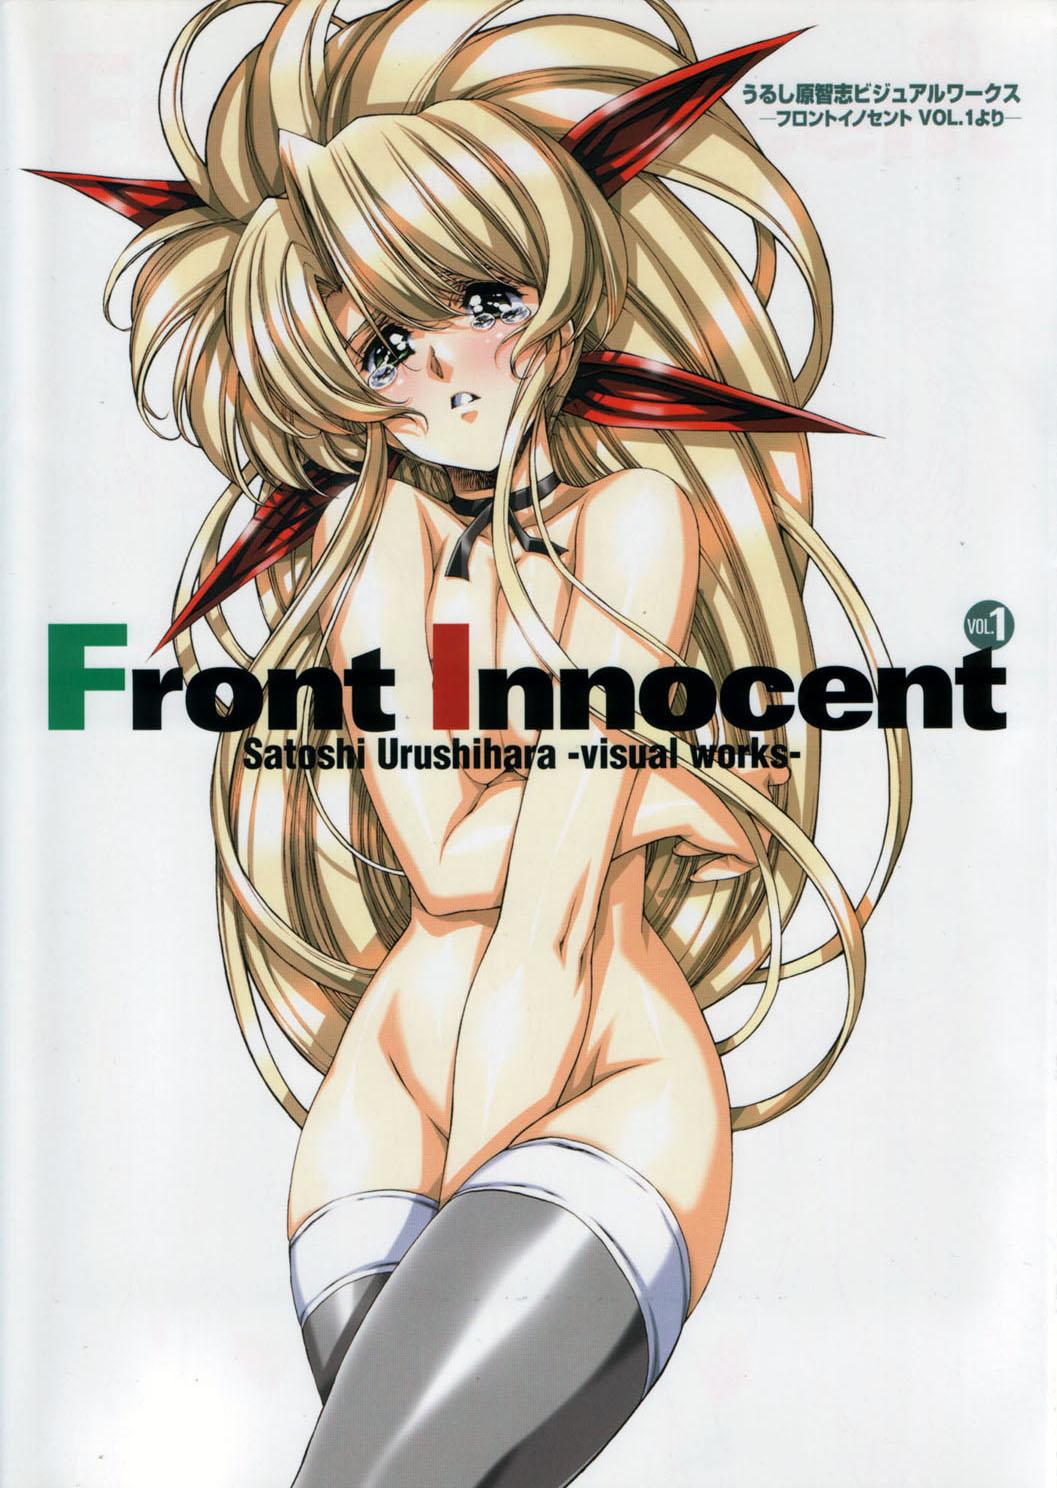 Off Front Innocent #1: Satoshi Urushihara Visual Works - Another lady innocent Blow Job Contest - Page 2